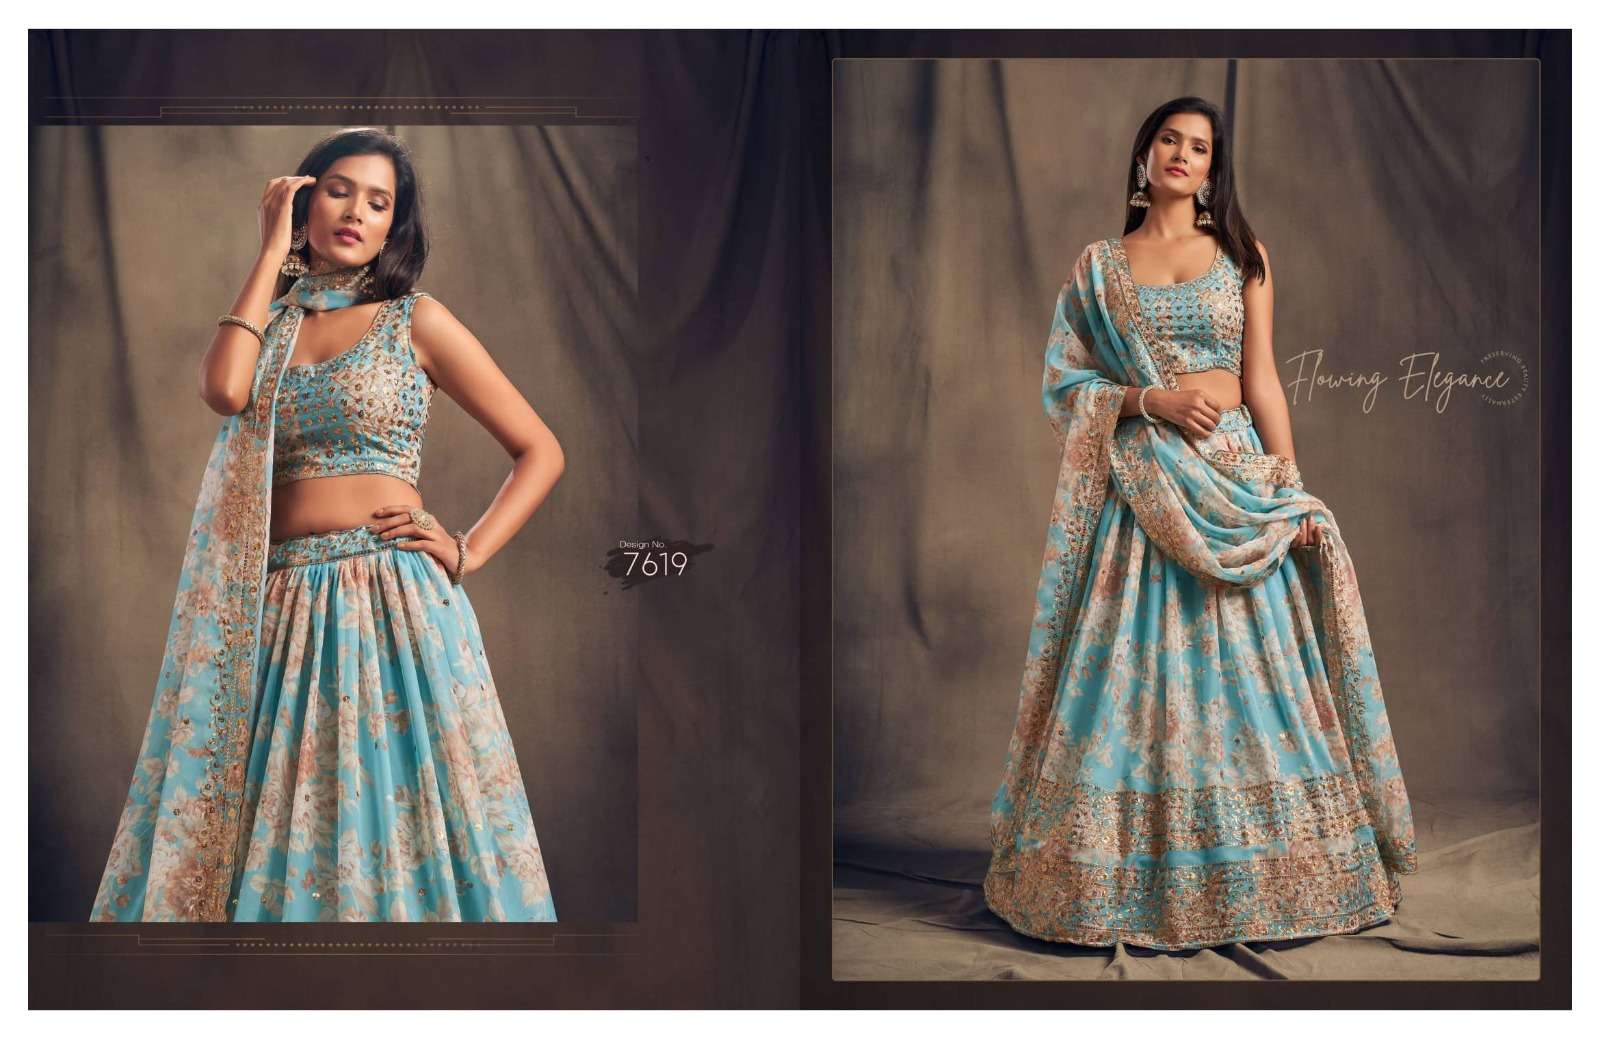 Floral Vol-2 By Zeel Clothing 7611 To 7618 Series Indian Traditional Beautiful Stylish Designer Banarasi Silk Jacquard Embroidered Party Wear Organza Lehengas At Wholesale Price